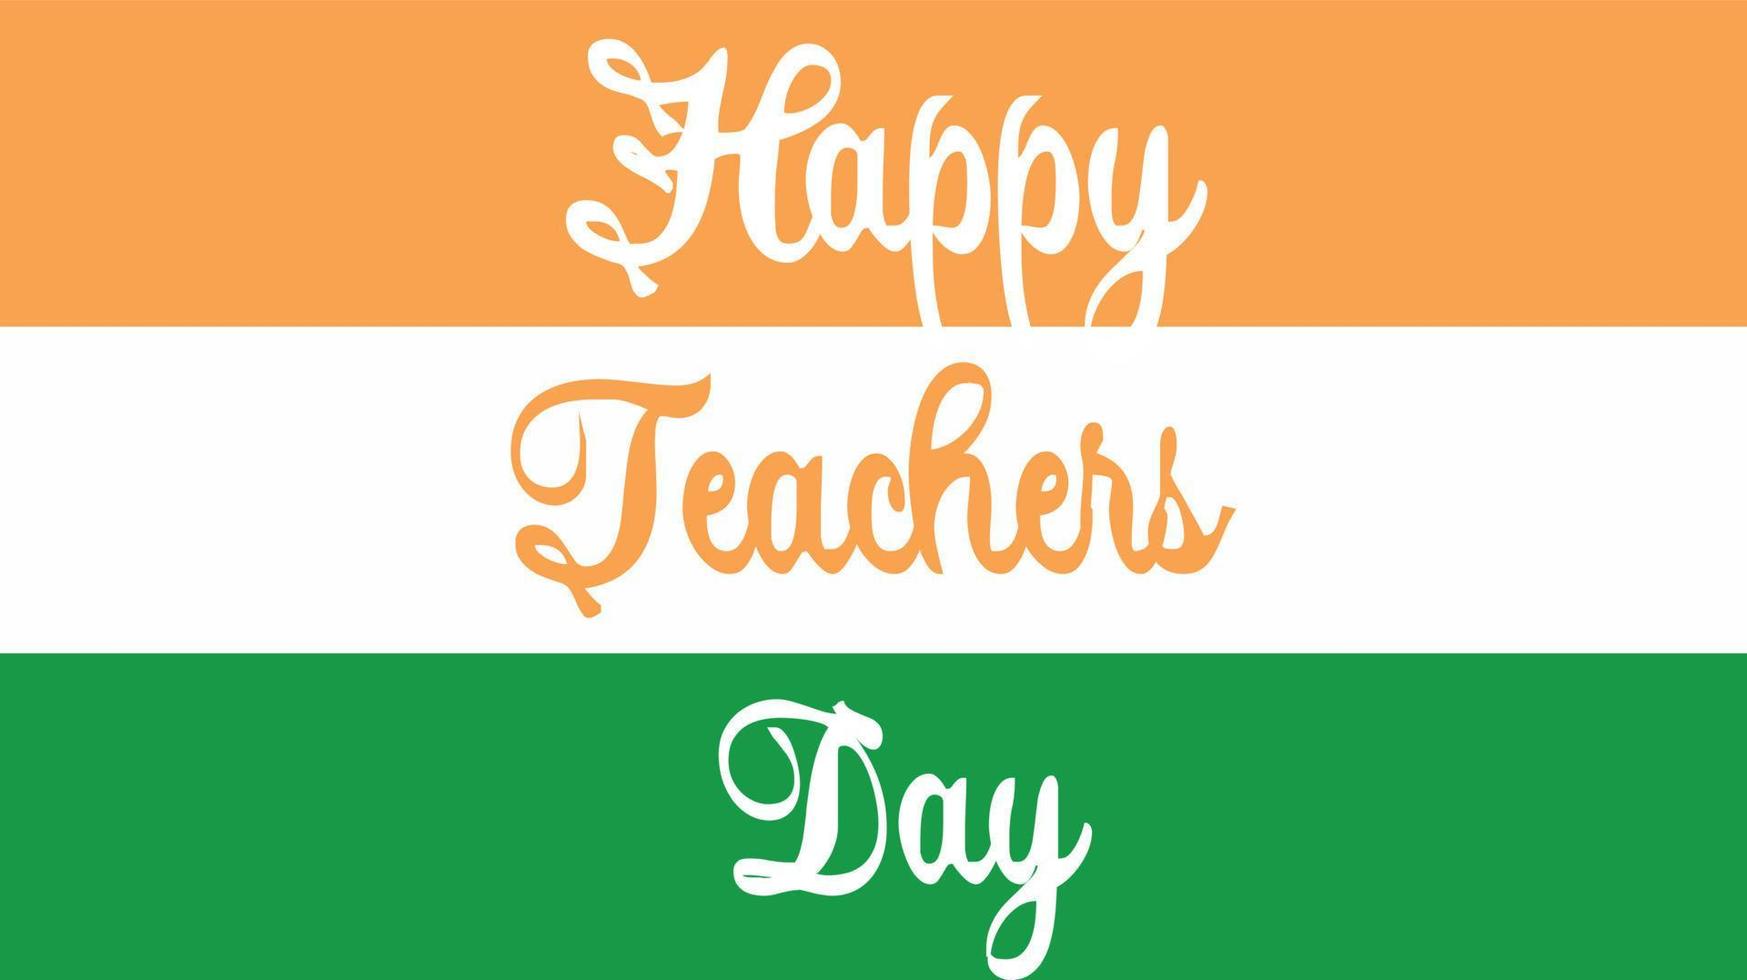 Happy teachers day celebration concept illustration with Indian flag. vector